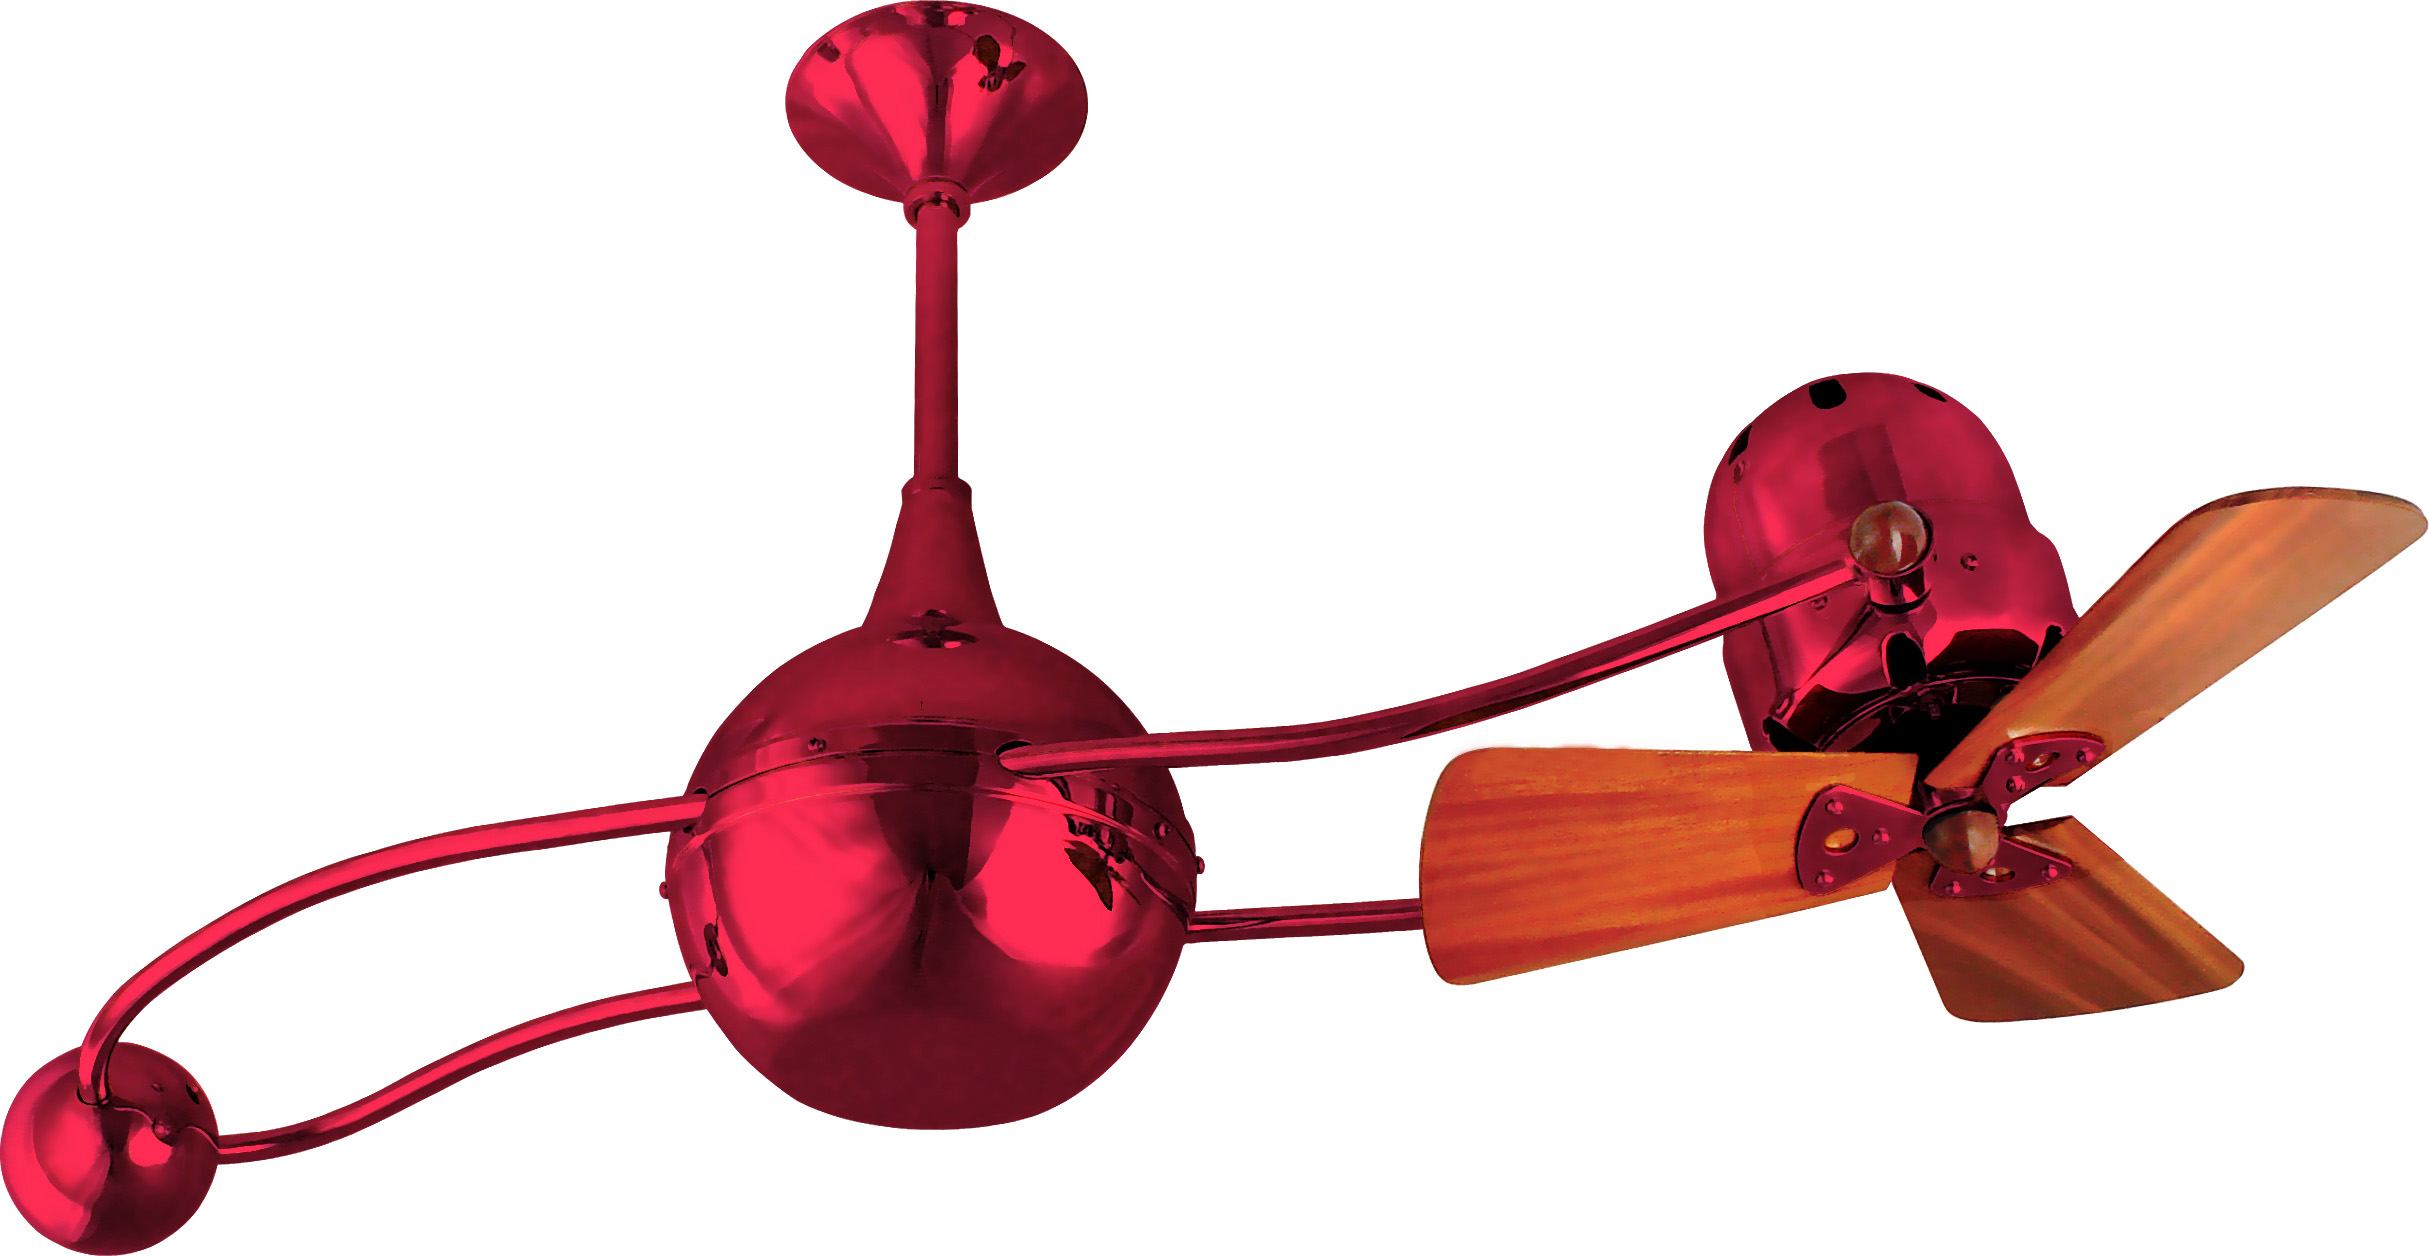 Brisa 2000 Ceiling Fan in Rubi / Red Finish with Mahogany Wood Blades